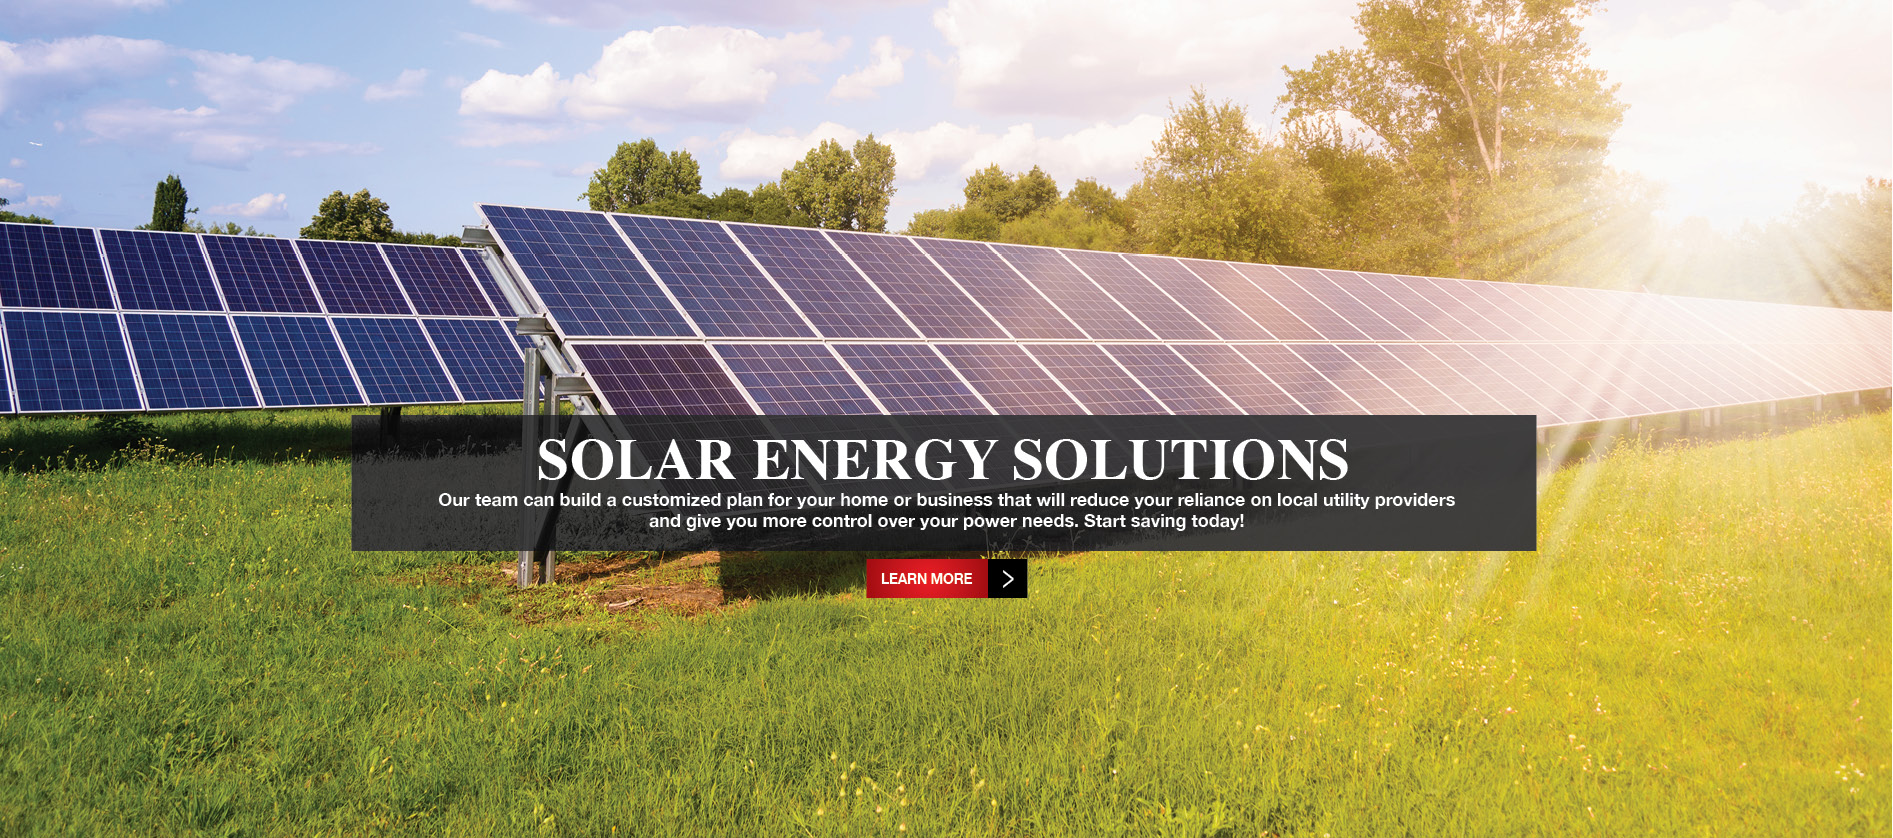 Solar energy solutions - Our team can build a customized plan for your home or business that will reduce your reliance on local utility providers and give you more control over your power needs. Start saving today!